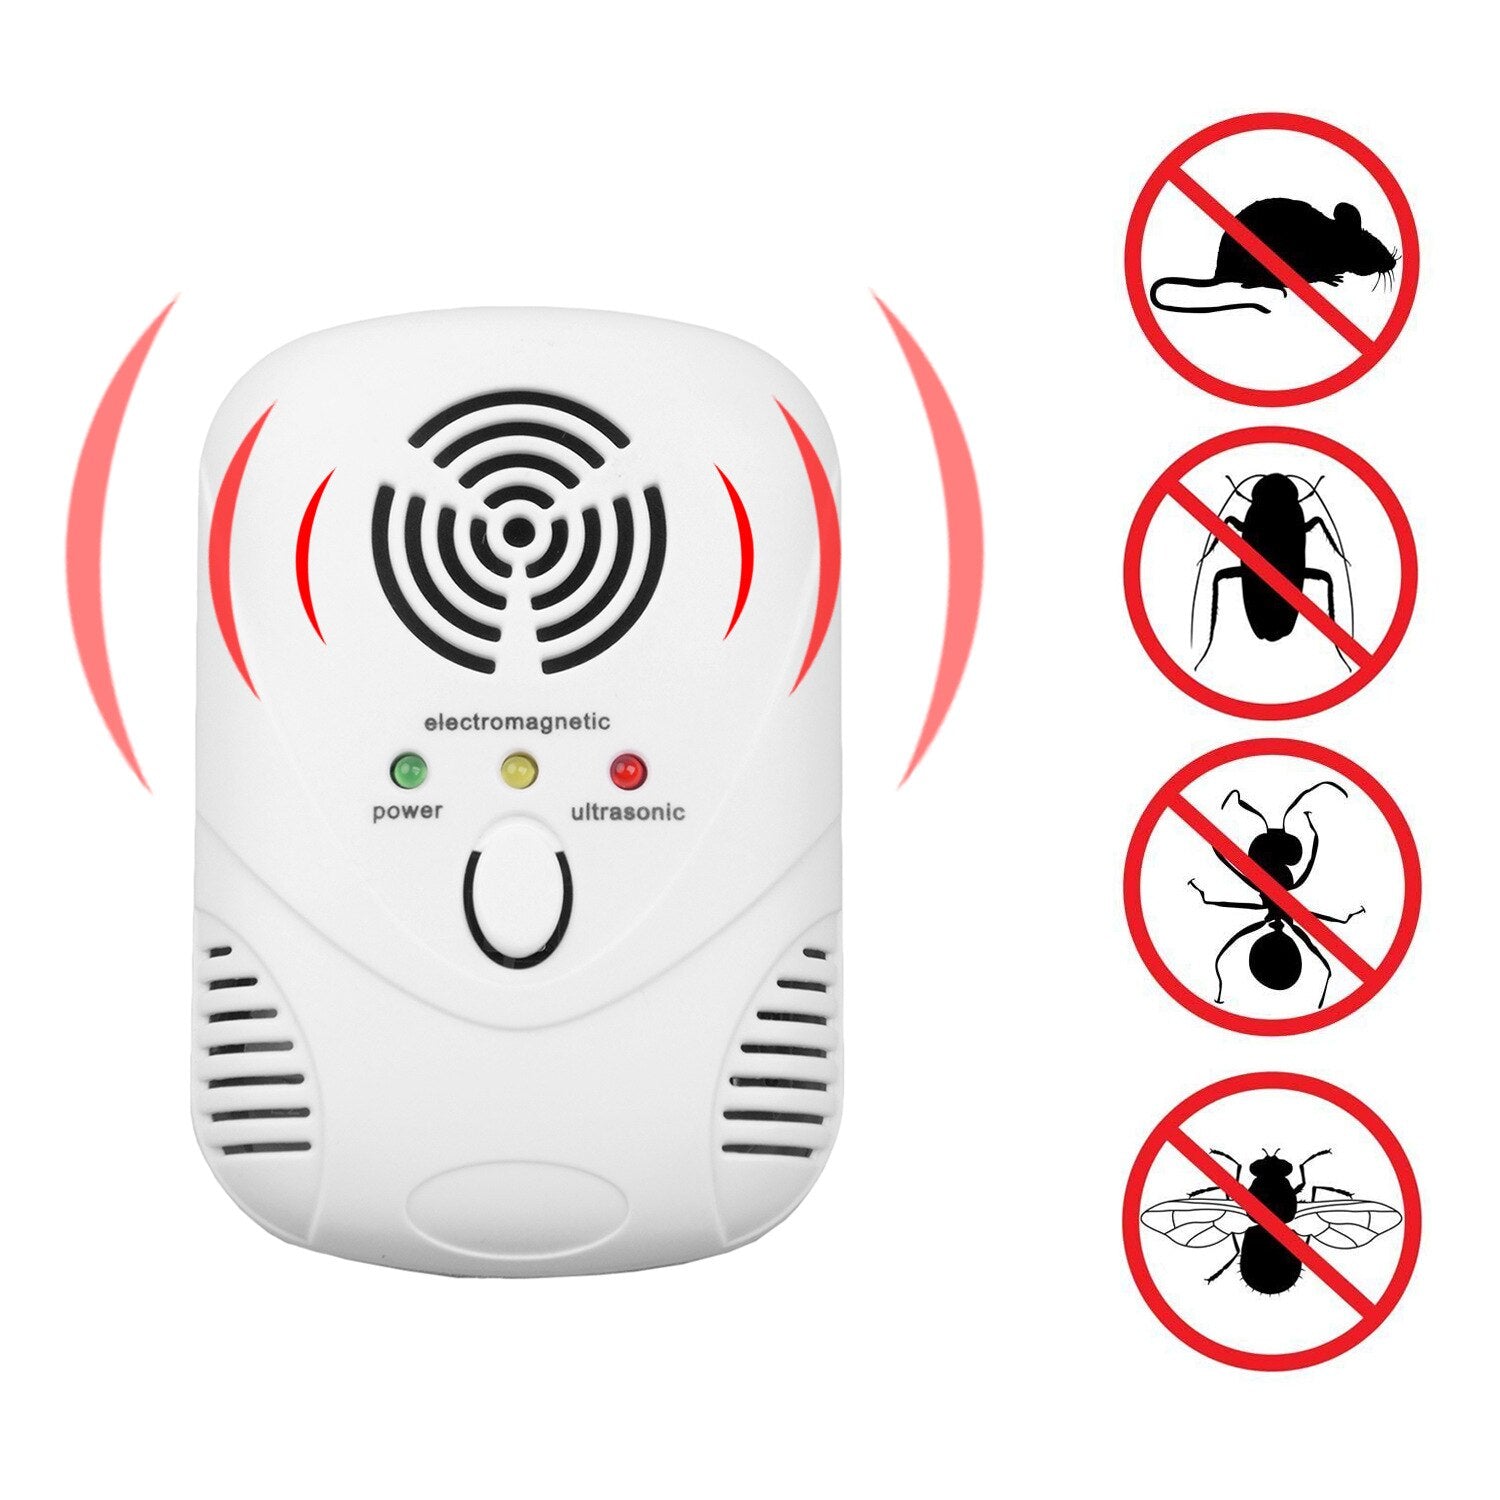 110-250V/6W Electronic Ultrasonic Mouse Killer Mouse Cockroach Trap Mosquito Repeller Insect Rats Spiders Control US/EU Plug - ebowsos